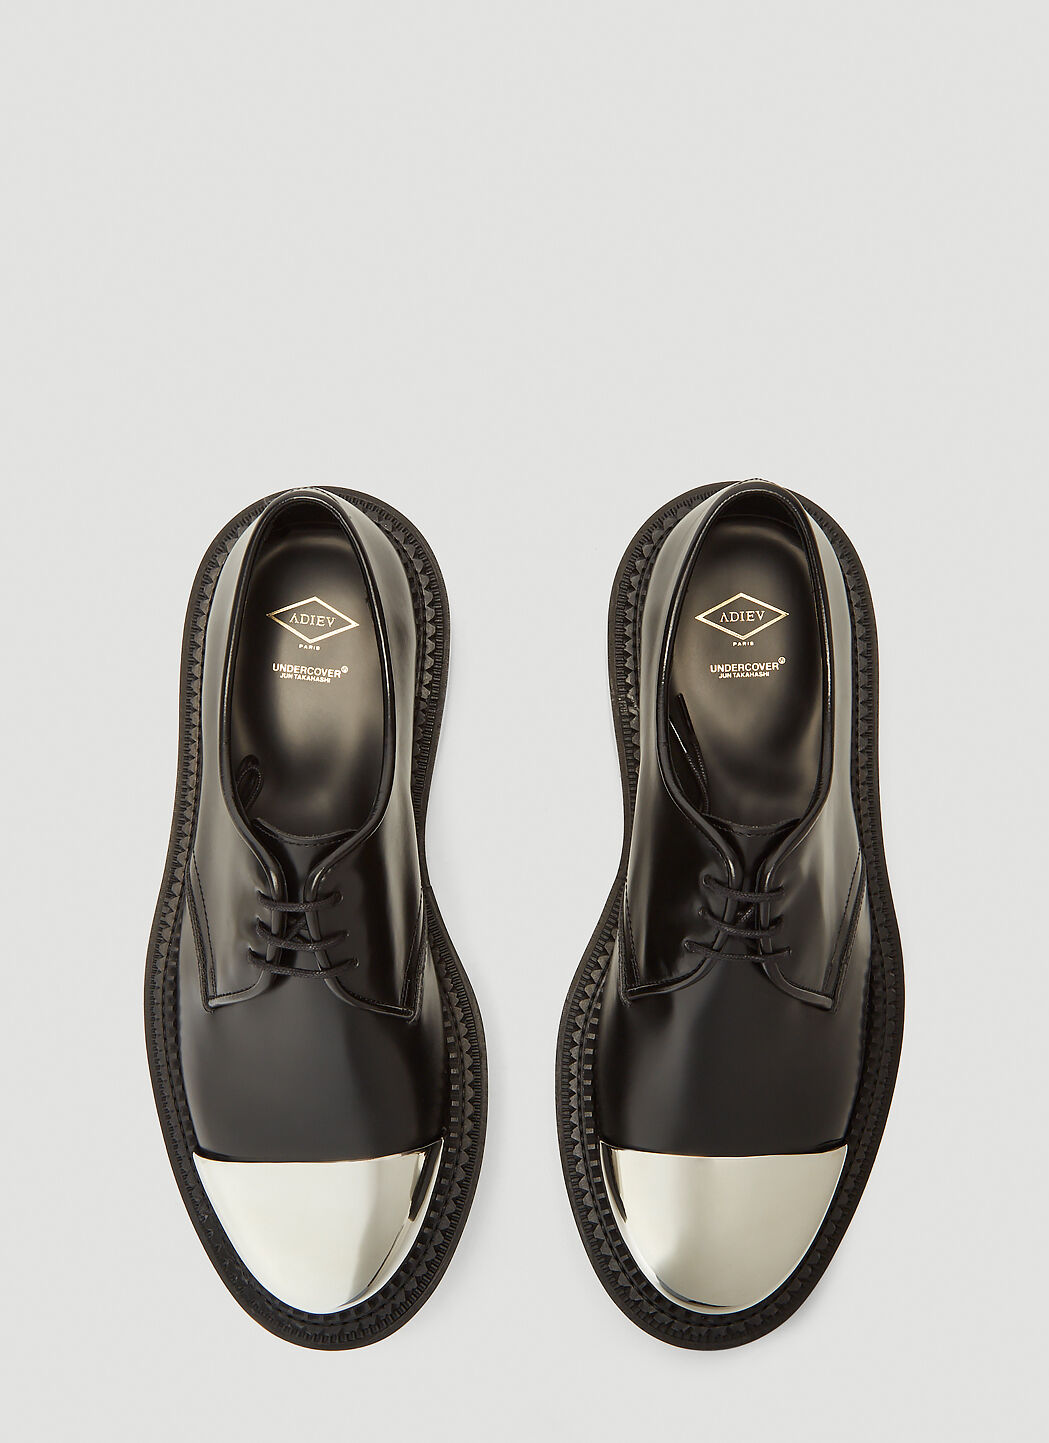 Adieu X Undercover Type 54C Metal Derby Shoes in Black | LN-CC®